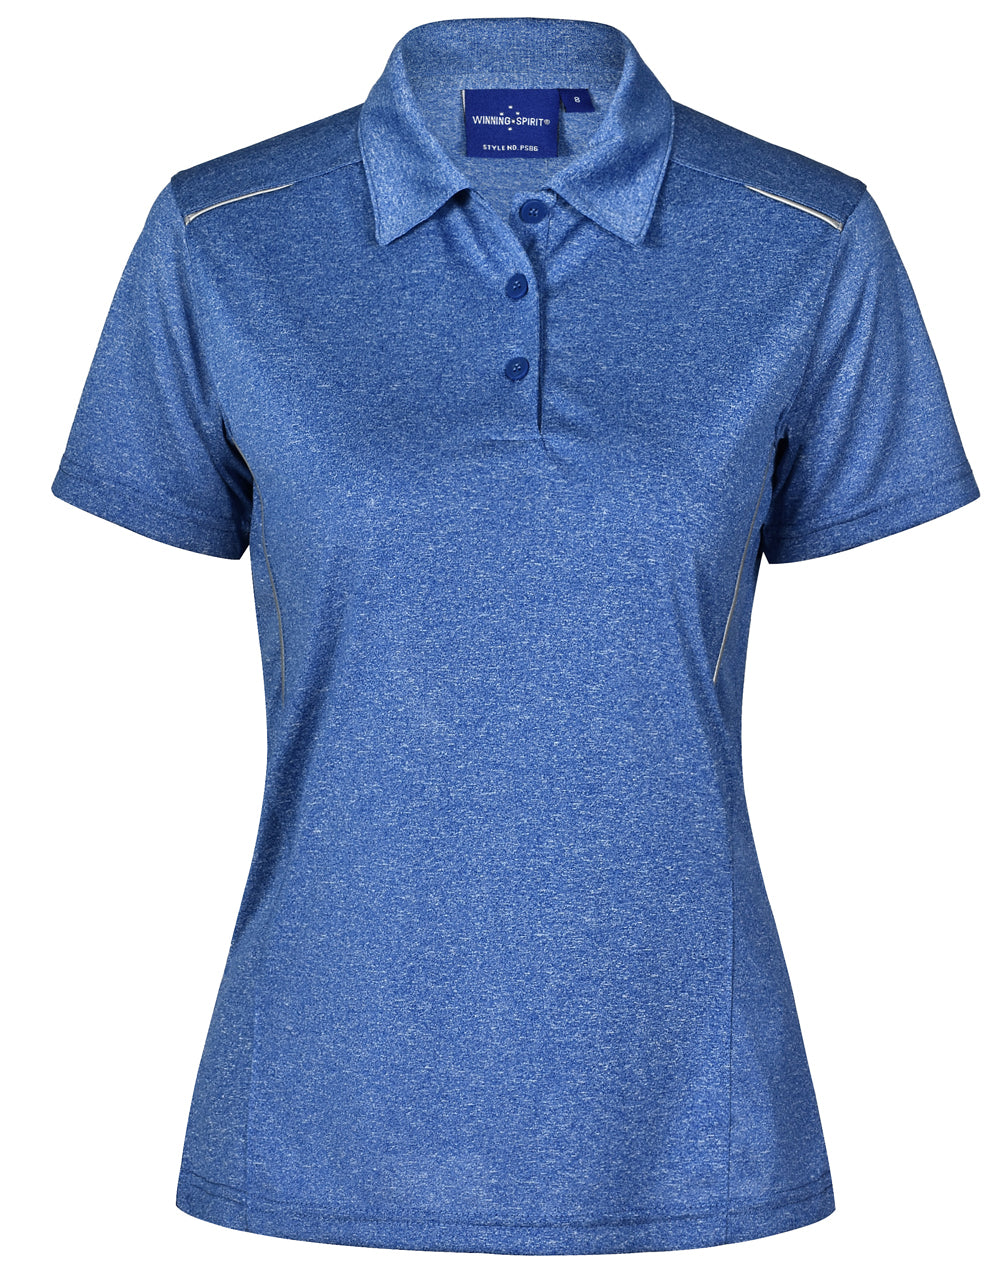 HARLAND POLO Ladies PS86